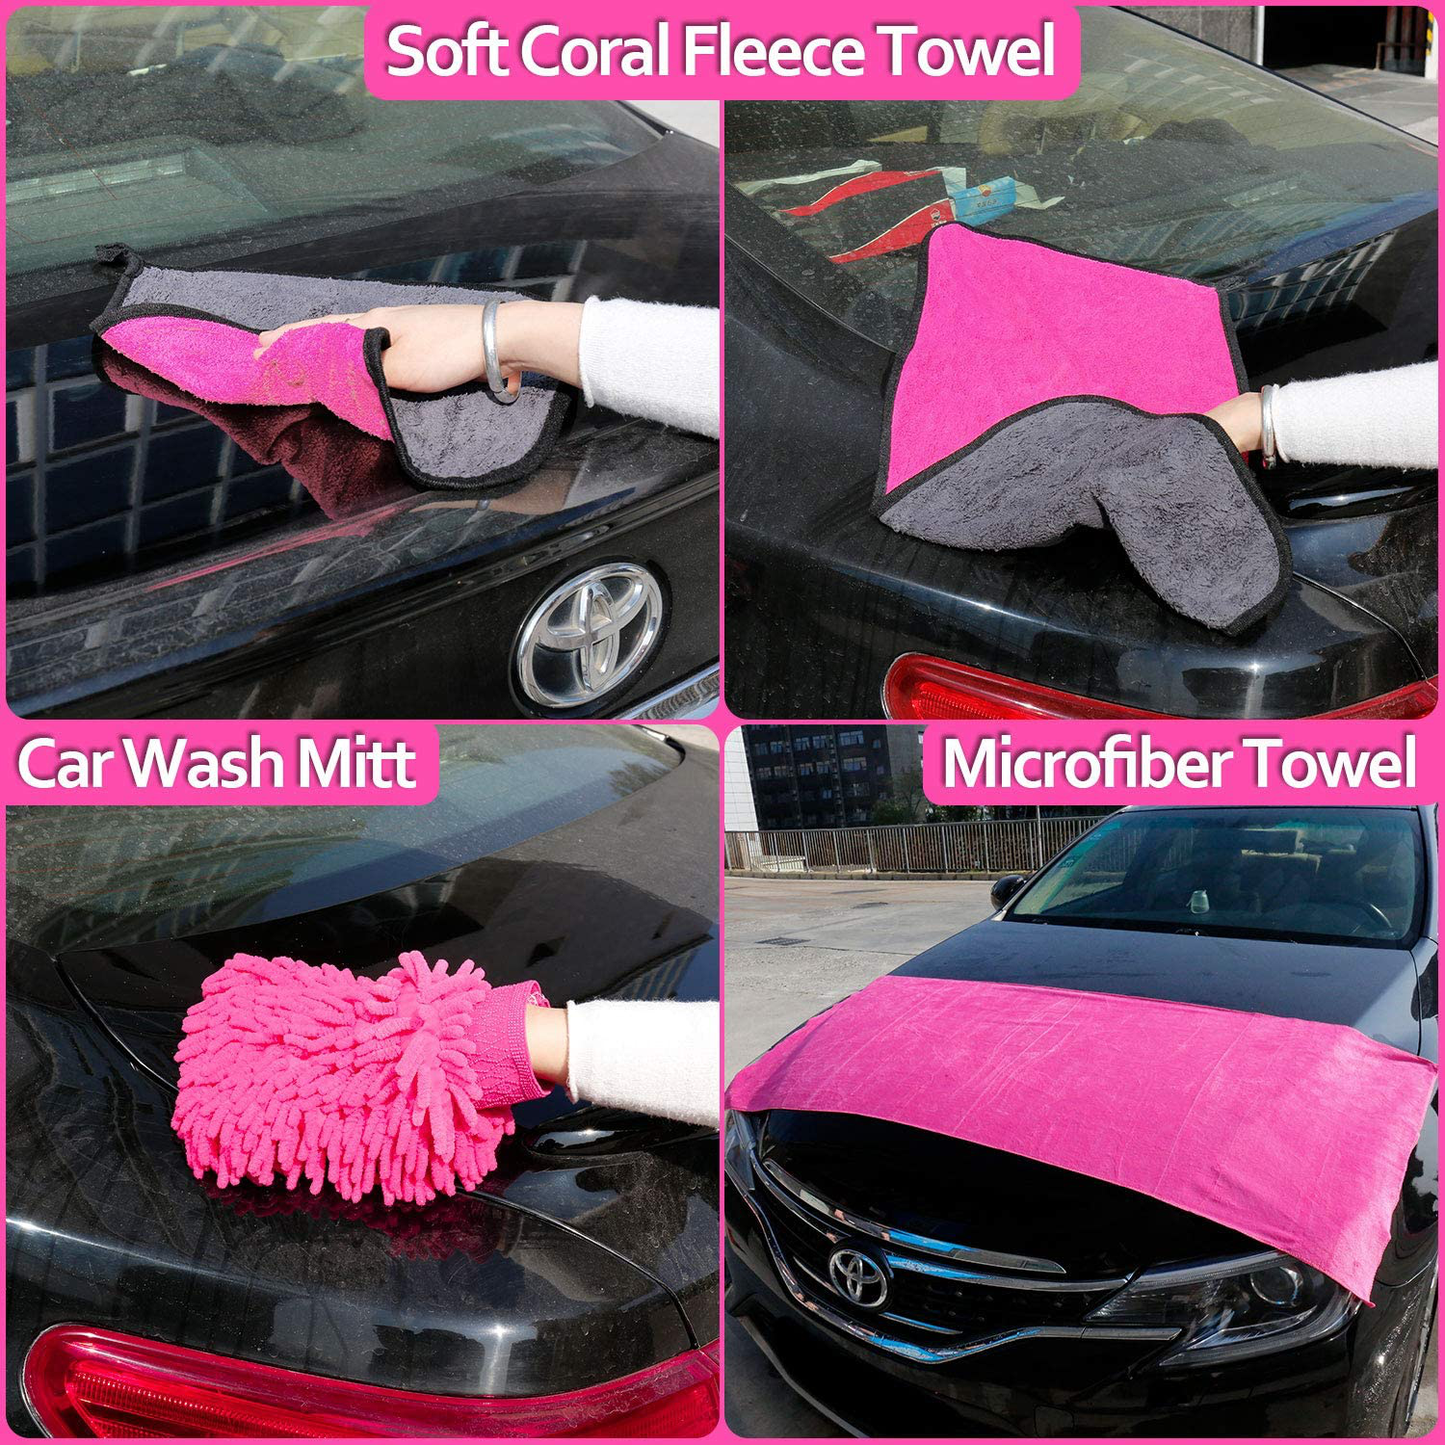 Car Wash Kit, Pink Car Cleaning Kit Interior and Exterior, Car Accessories for Women - Cleaning Gel, Microfiber Cleaning Cloth, Car Wash Mitt, Duster, Squeegee, Microfiber Wax Applicator(17pcs)